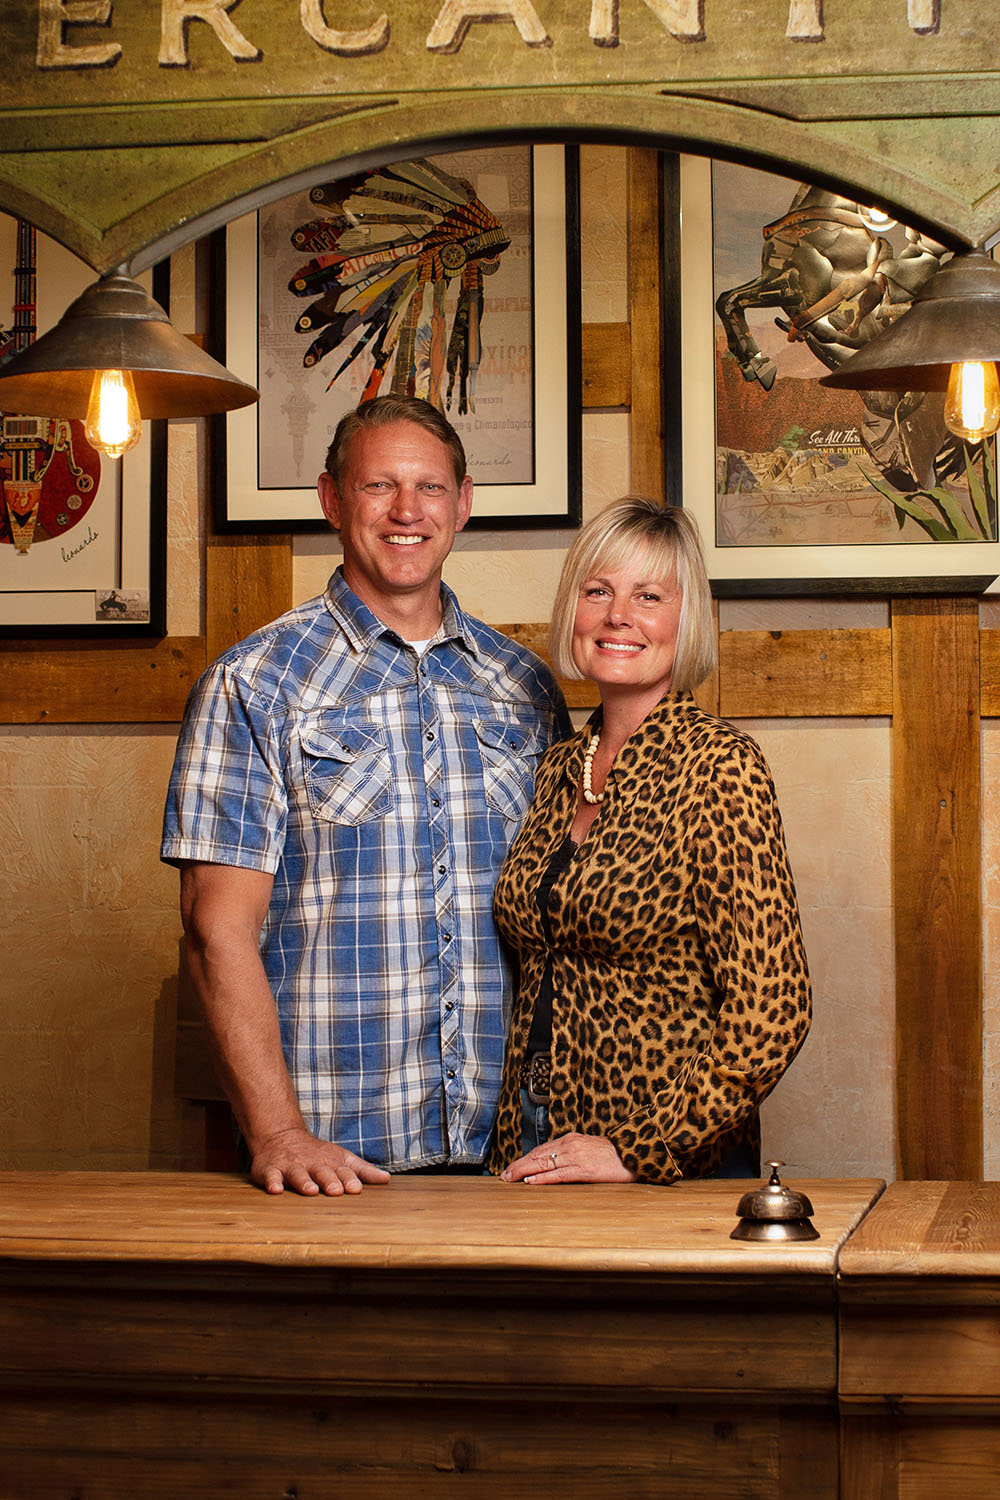 Jeff and Julie, owners of Big Bronco Cave Creek